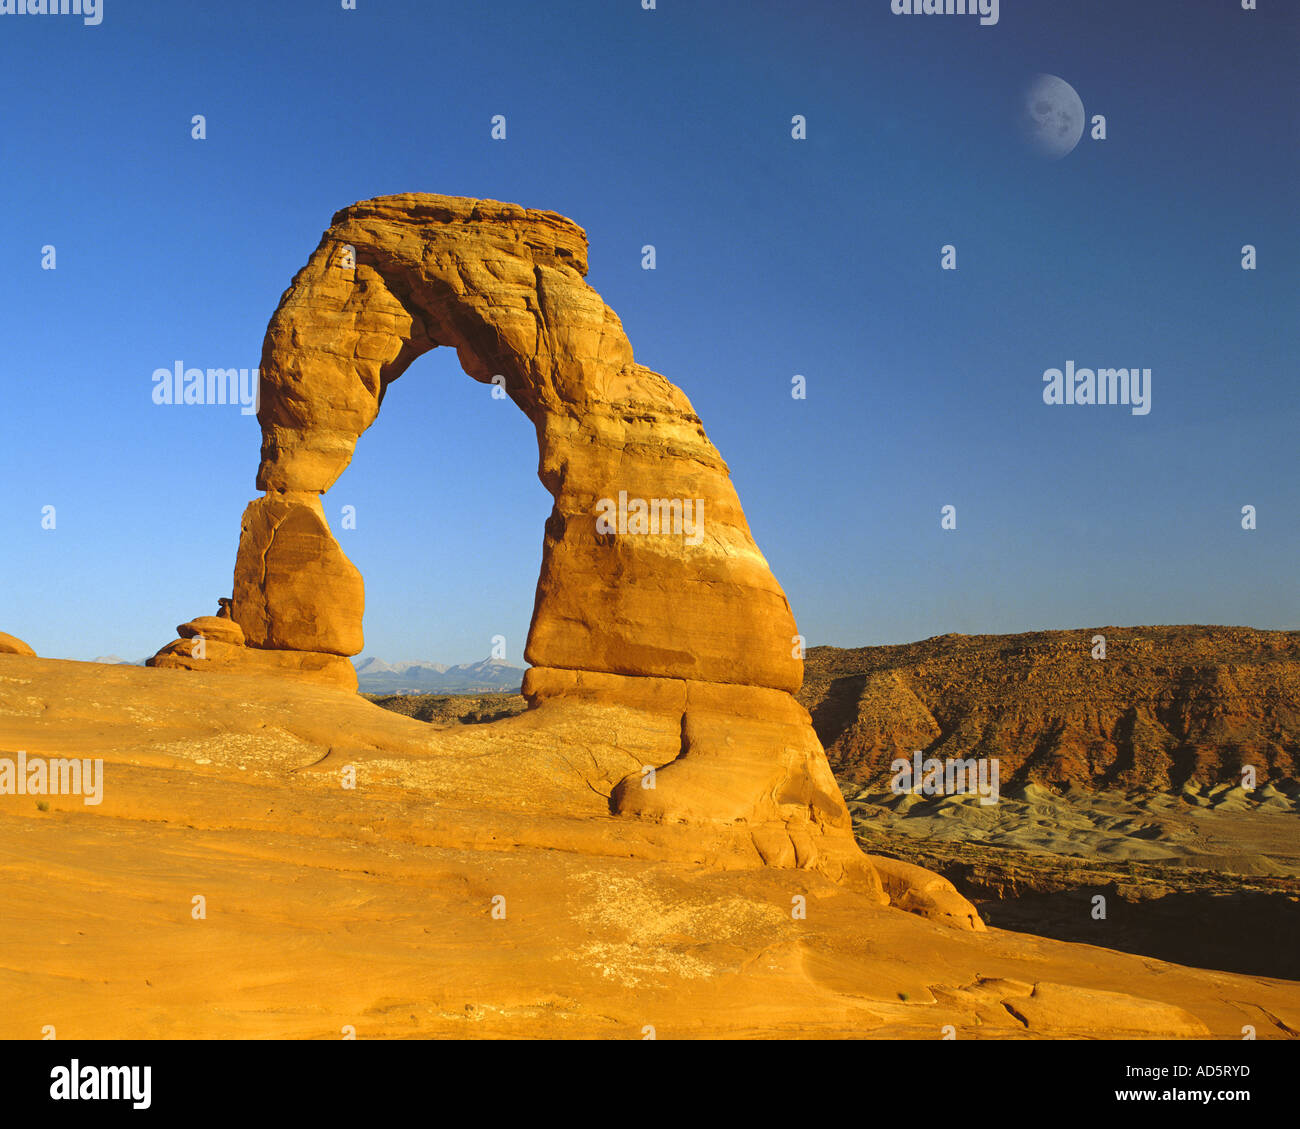 USA - UTAH: Delicate Arch im Arches National Park Stockfoto